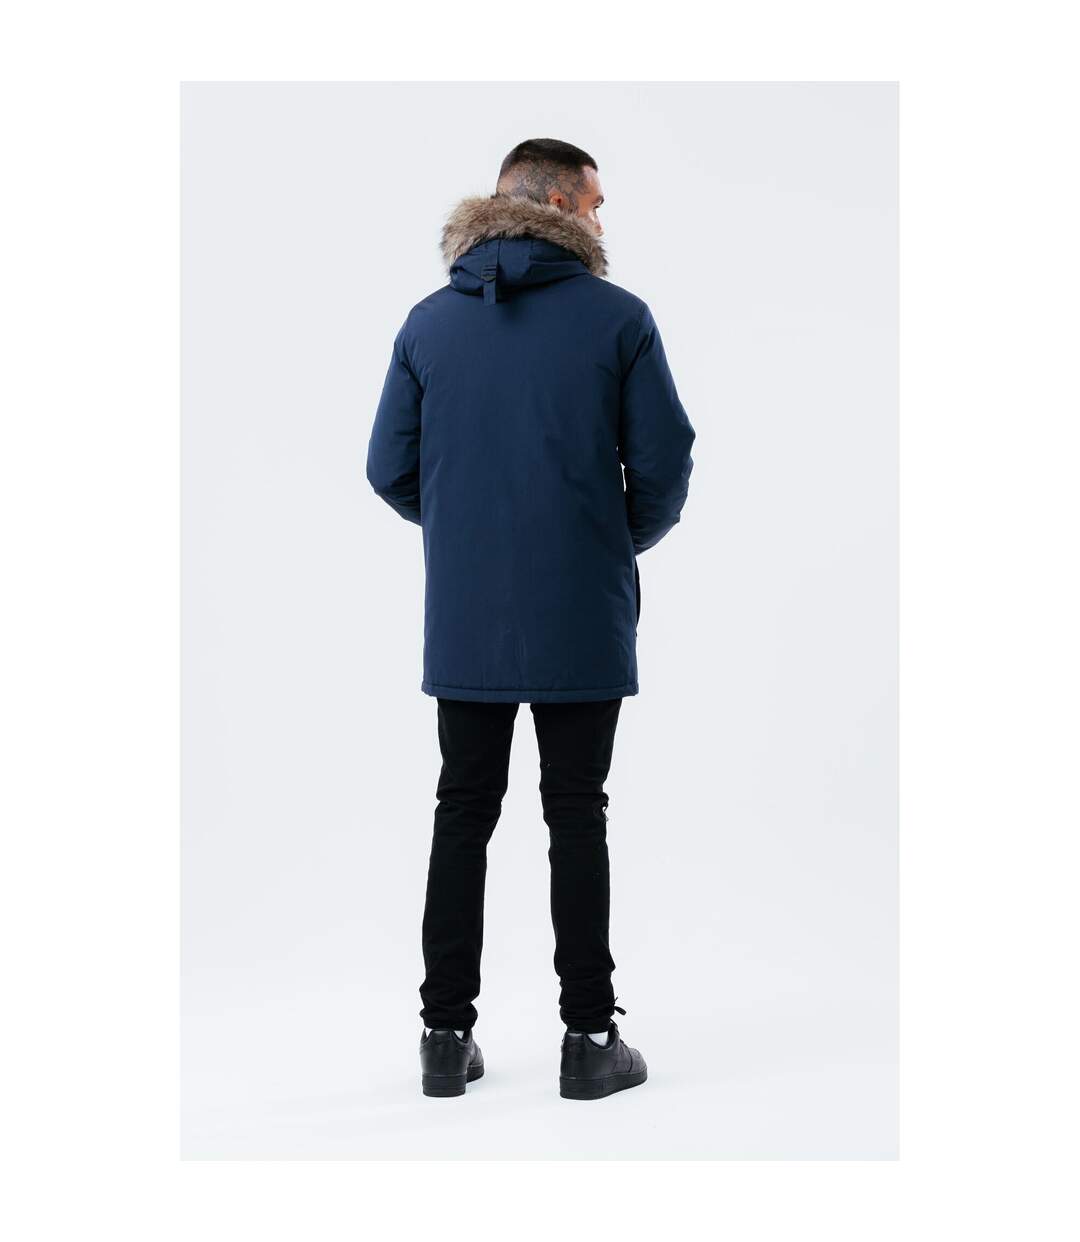 Hype Parka Luxe Longline pour hommes (Marine) - UTHY6868